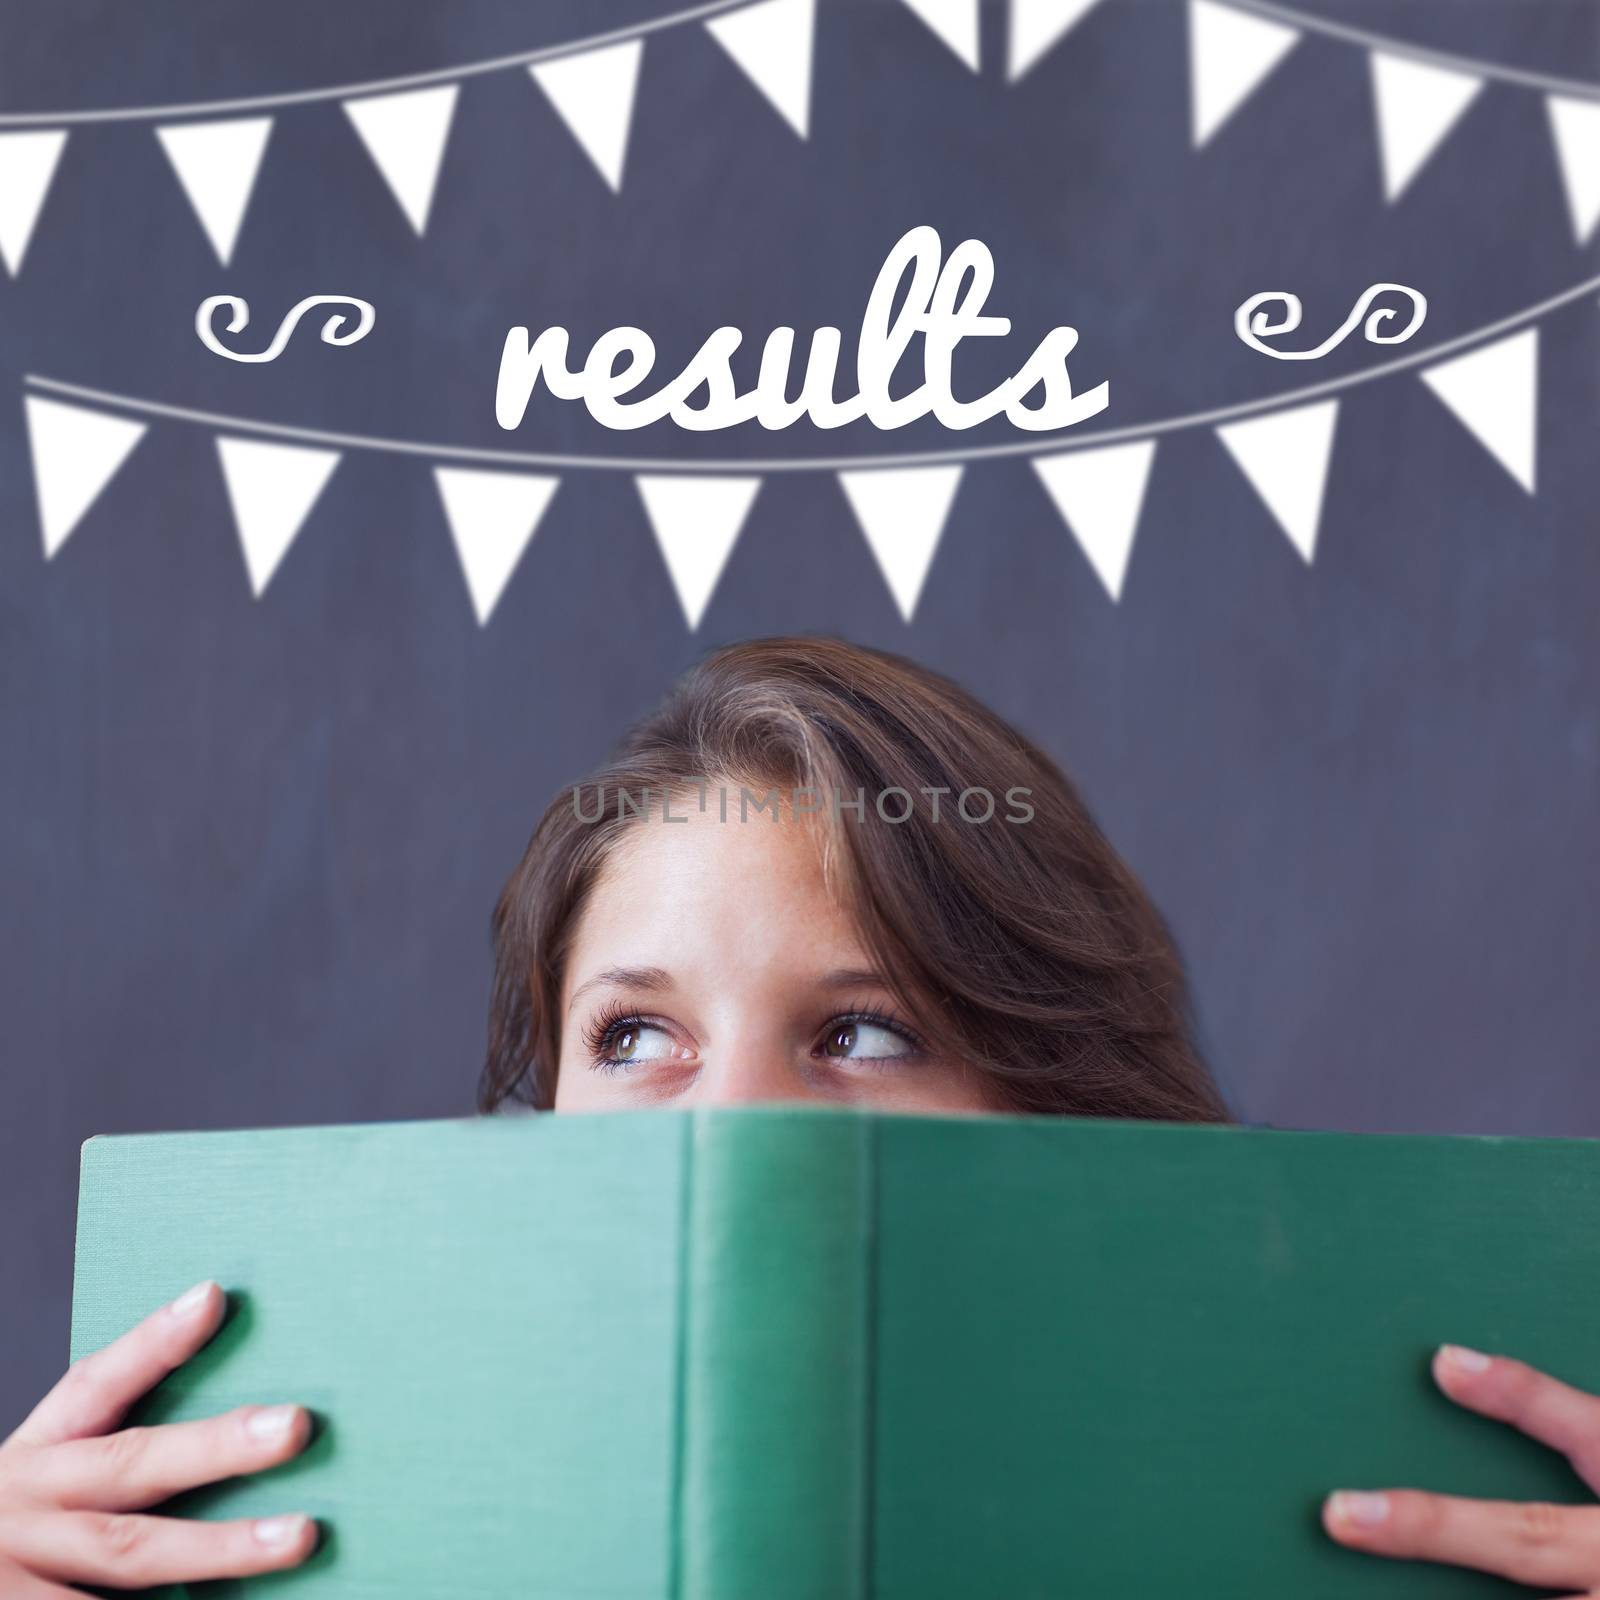 The word results and bunting against student holding book